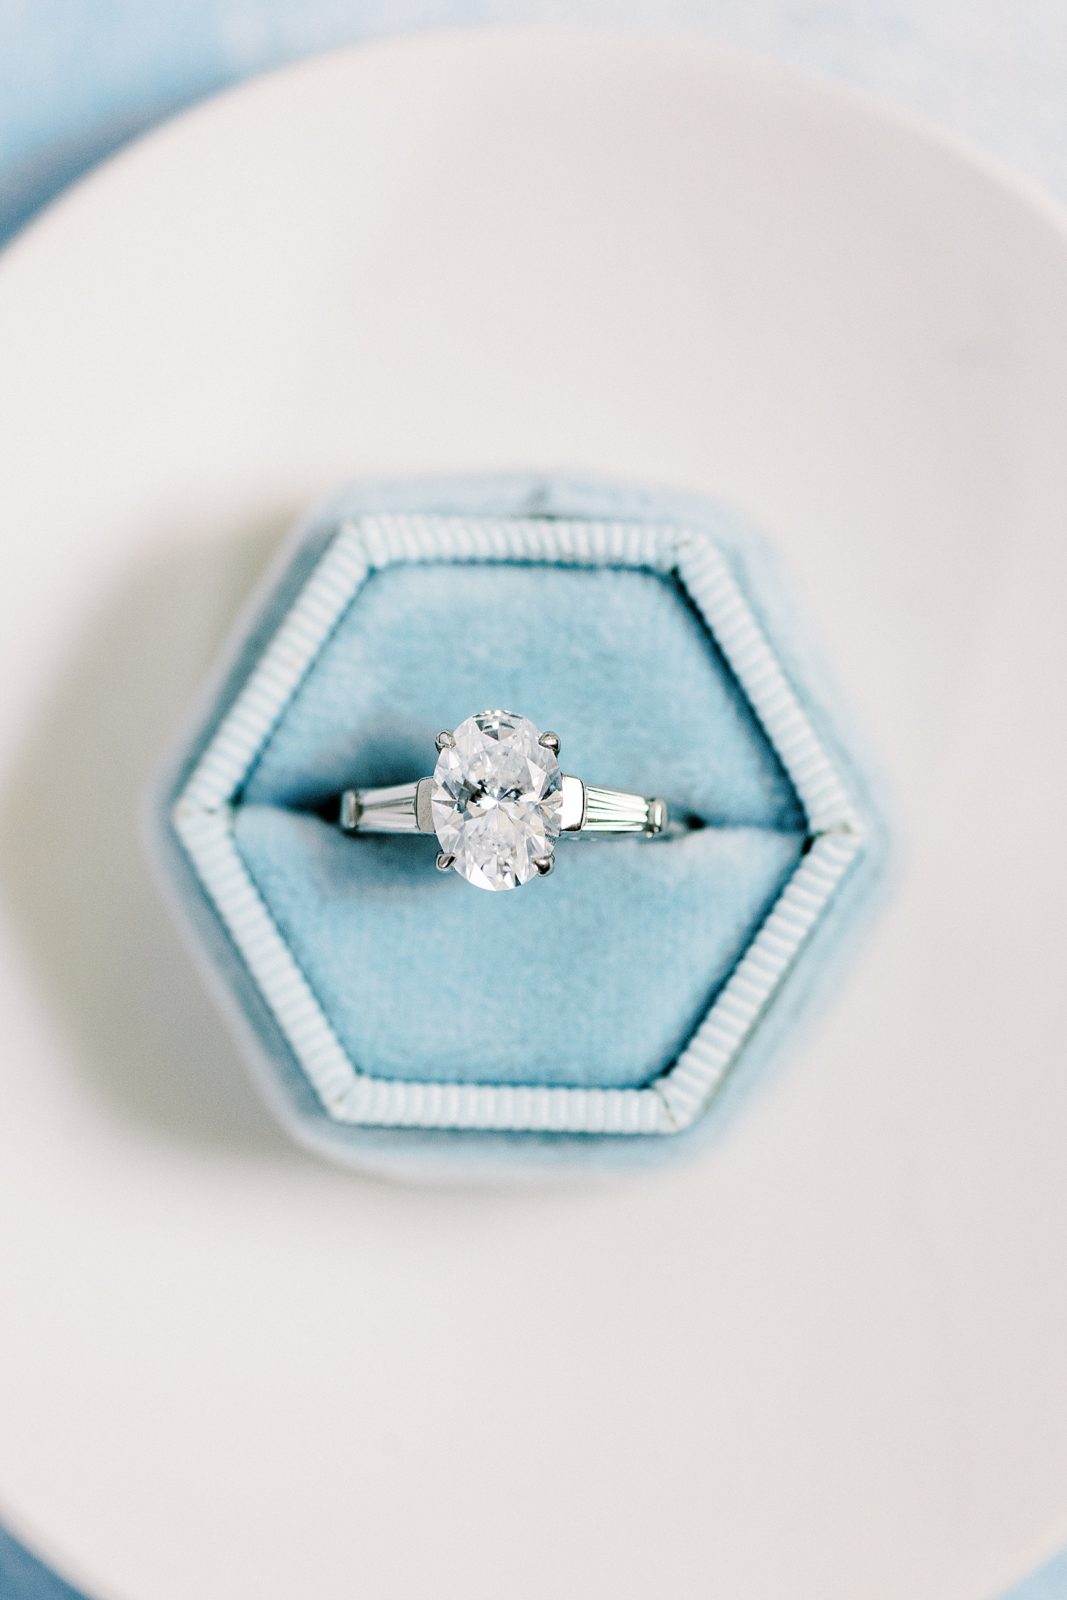 A silver engagement ring in a blue box for a blog post about streamlining your workflow as a wedding photographer.